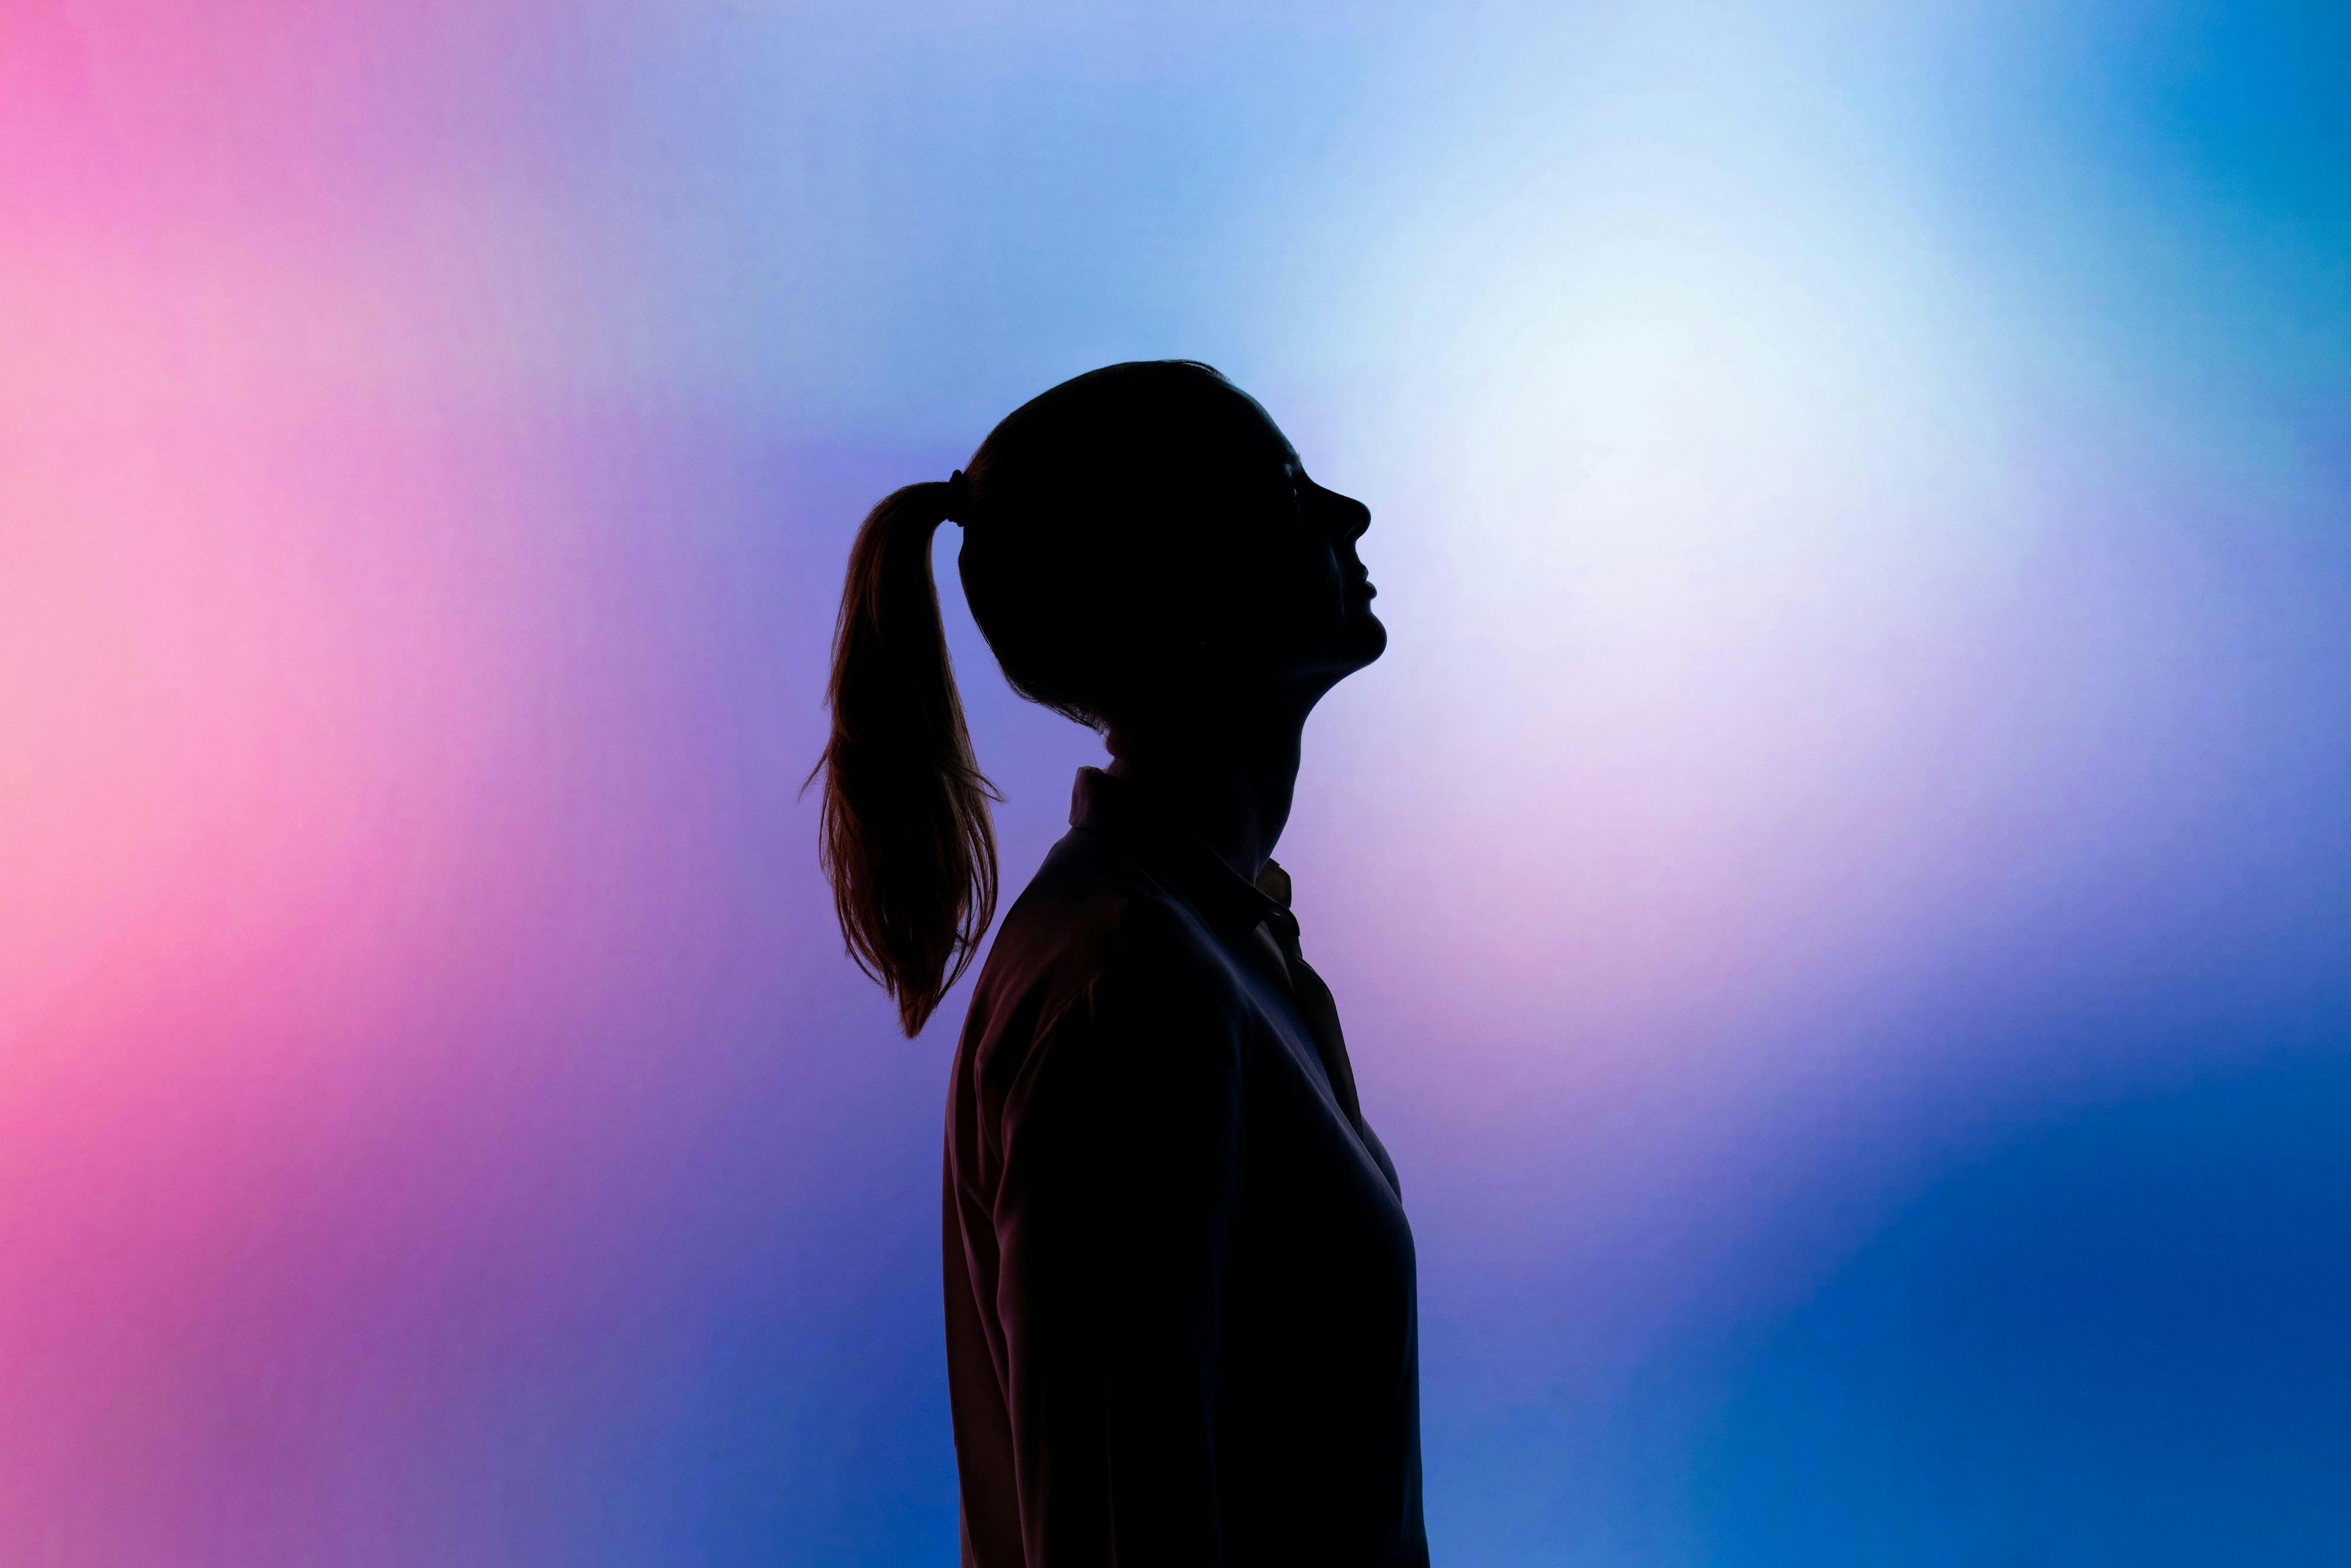 Silhouetted person stands in profile with a ponytail against a vibrant, gradient background of pink, purple, and blue hues.